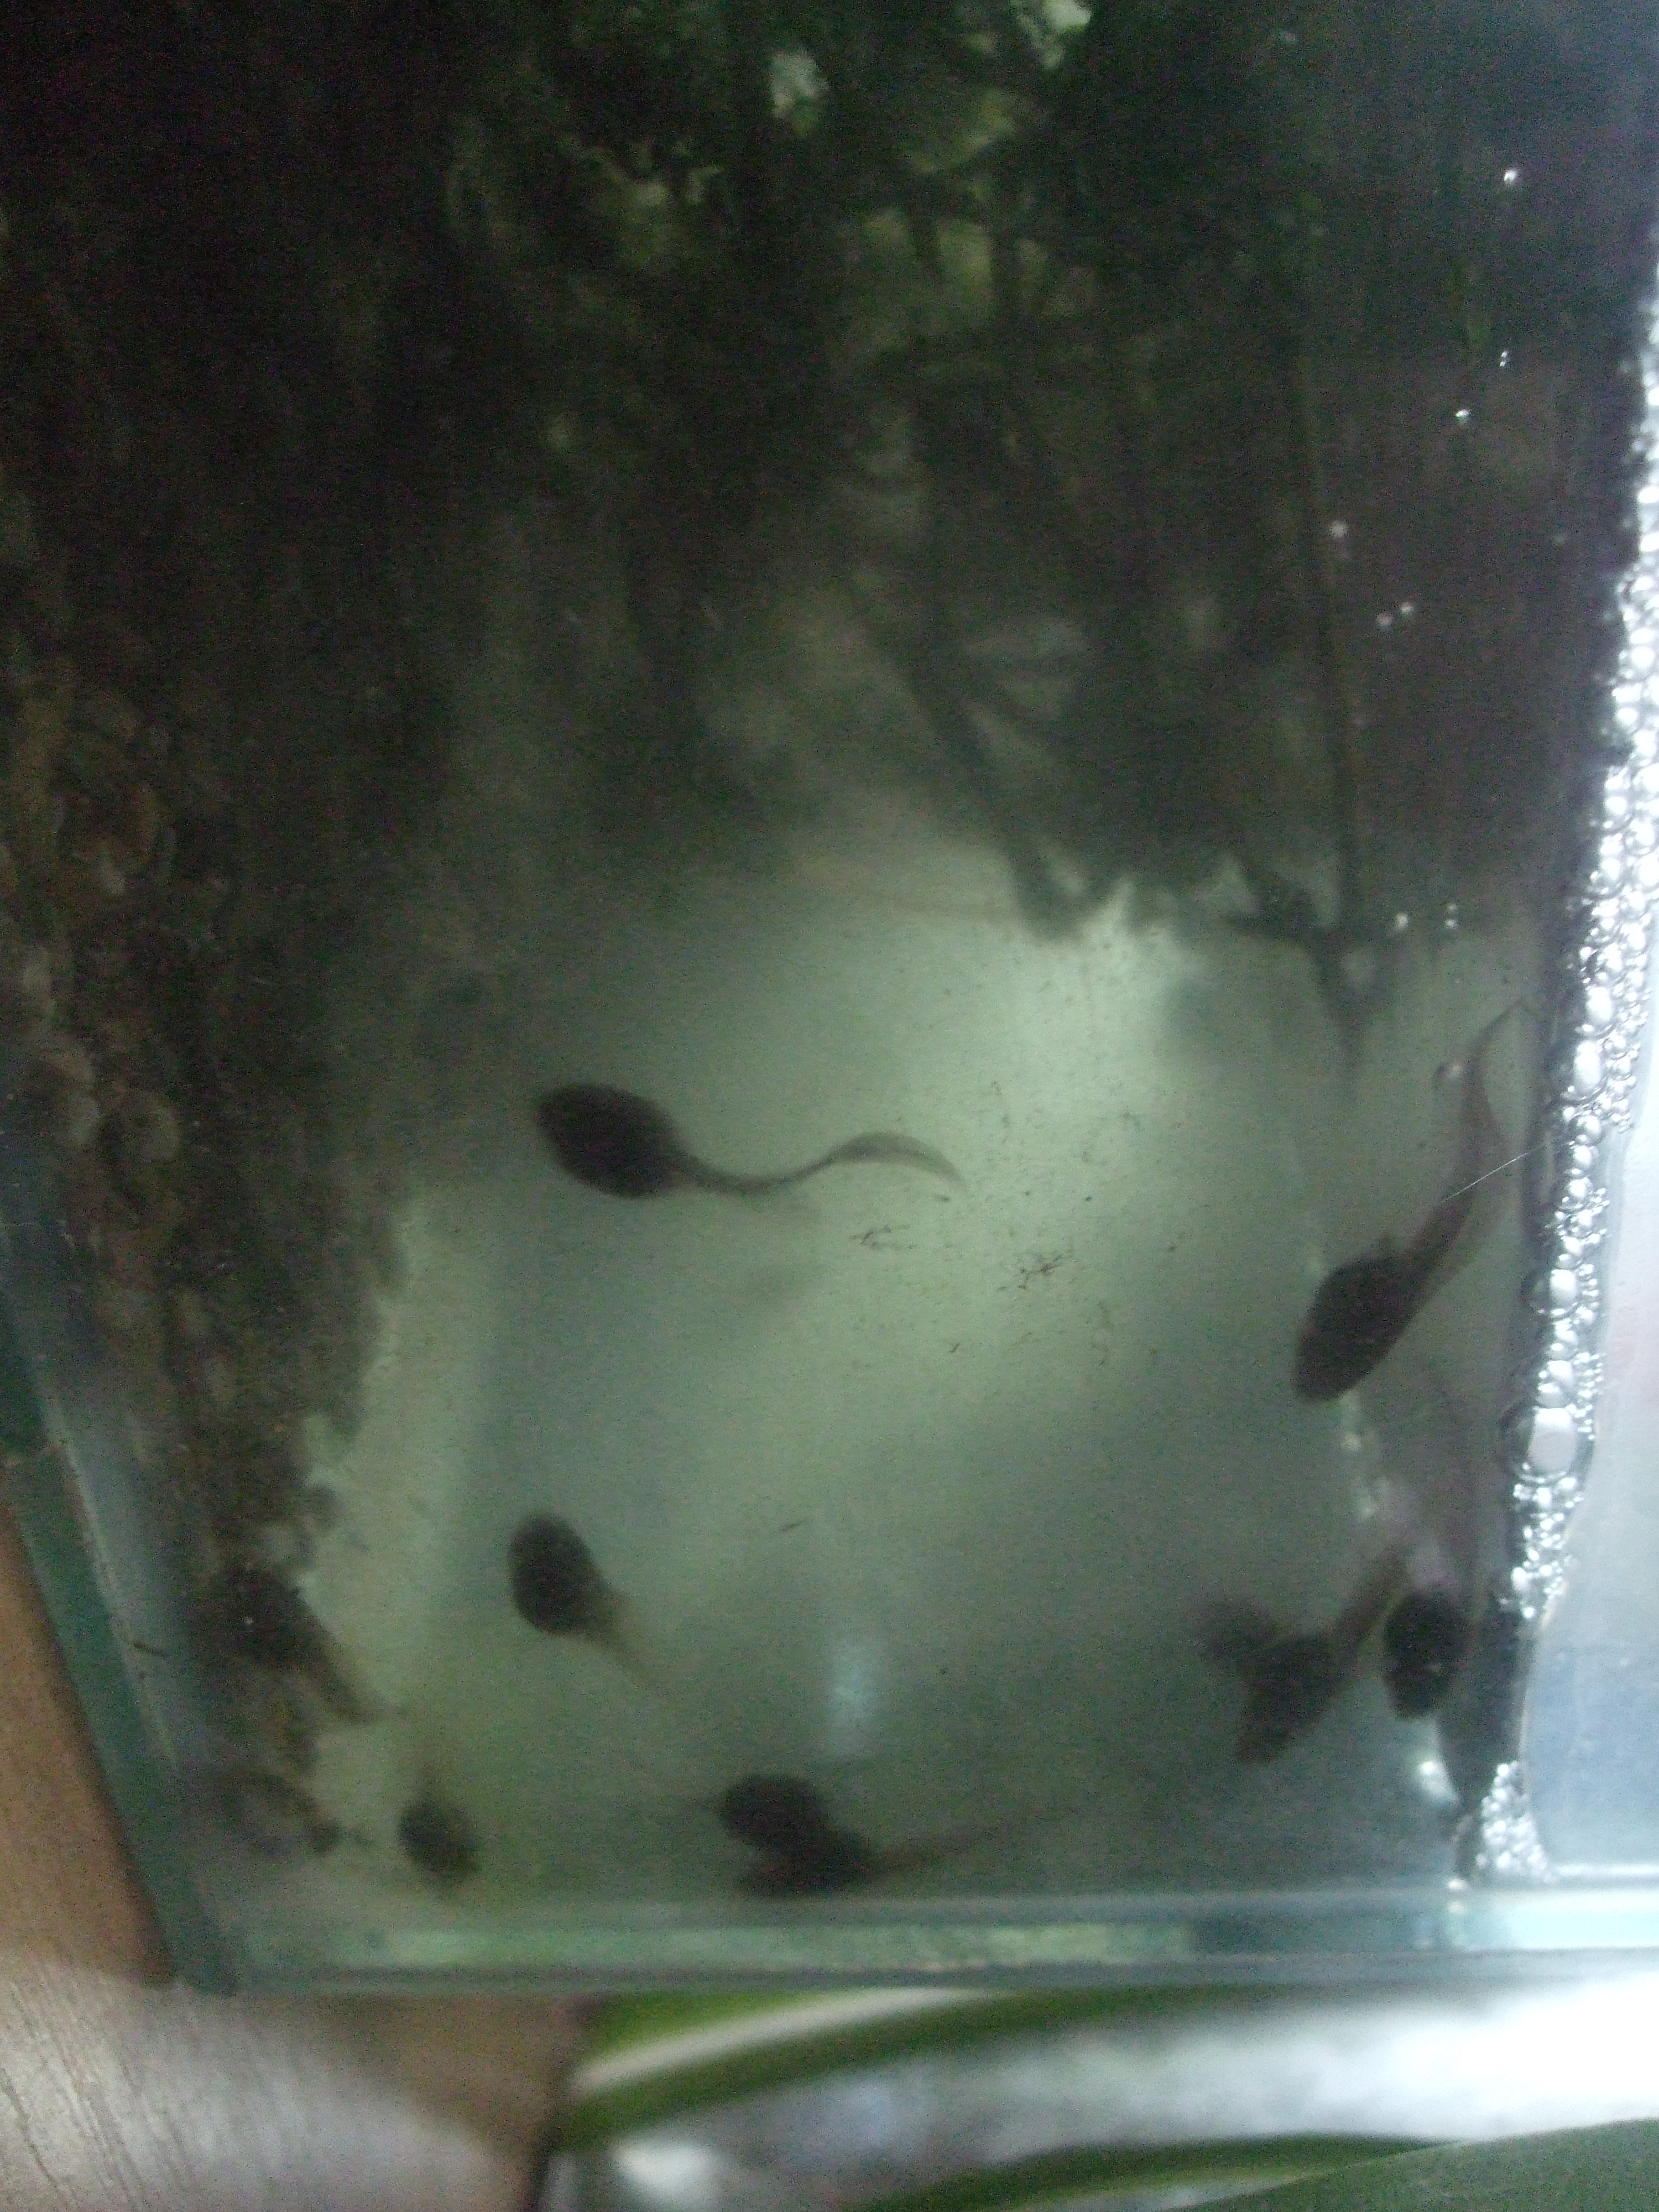 The tadpoles are growing